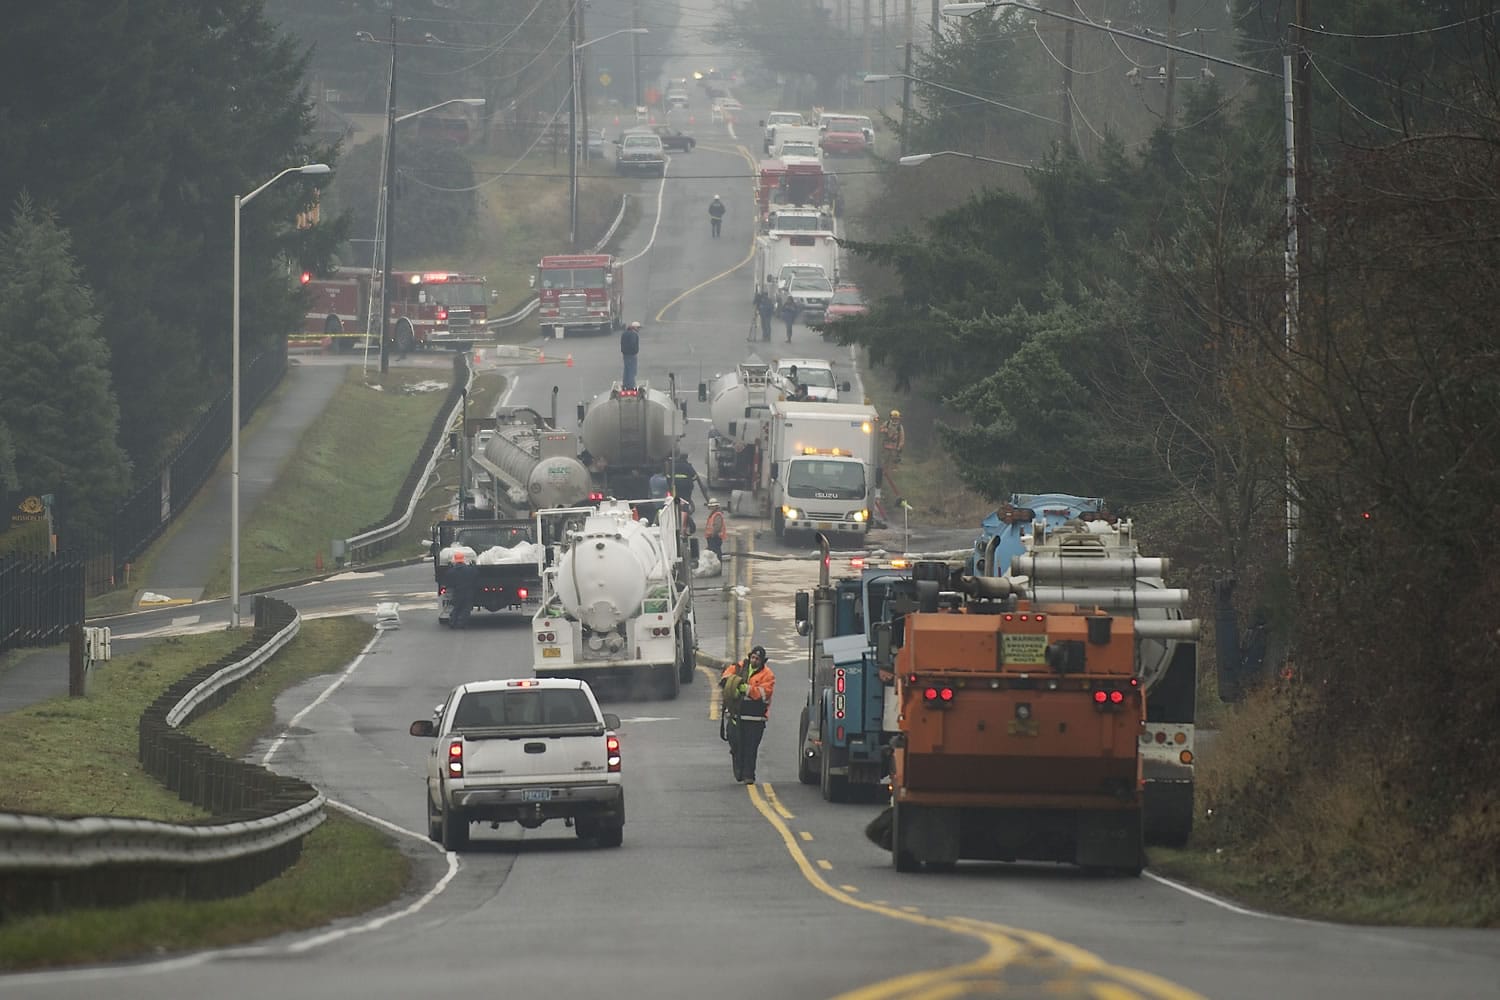 Emergency crews work to clean up a tanker truck accident on Northeast 18th street Friday in Vancouver.